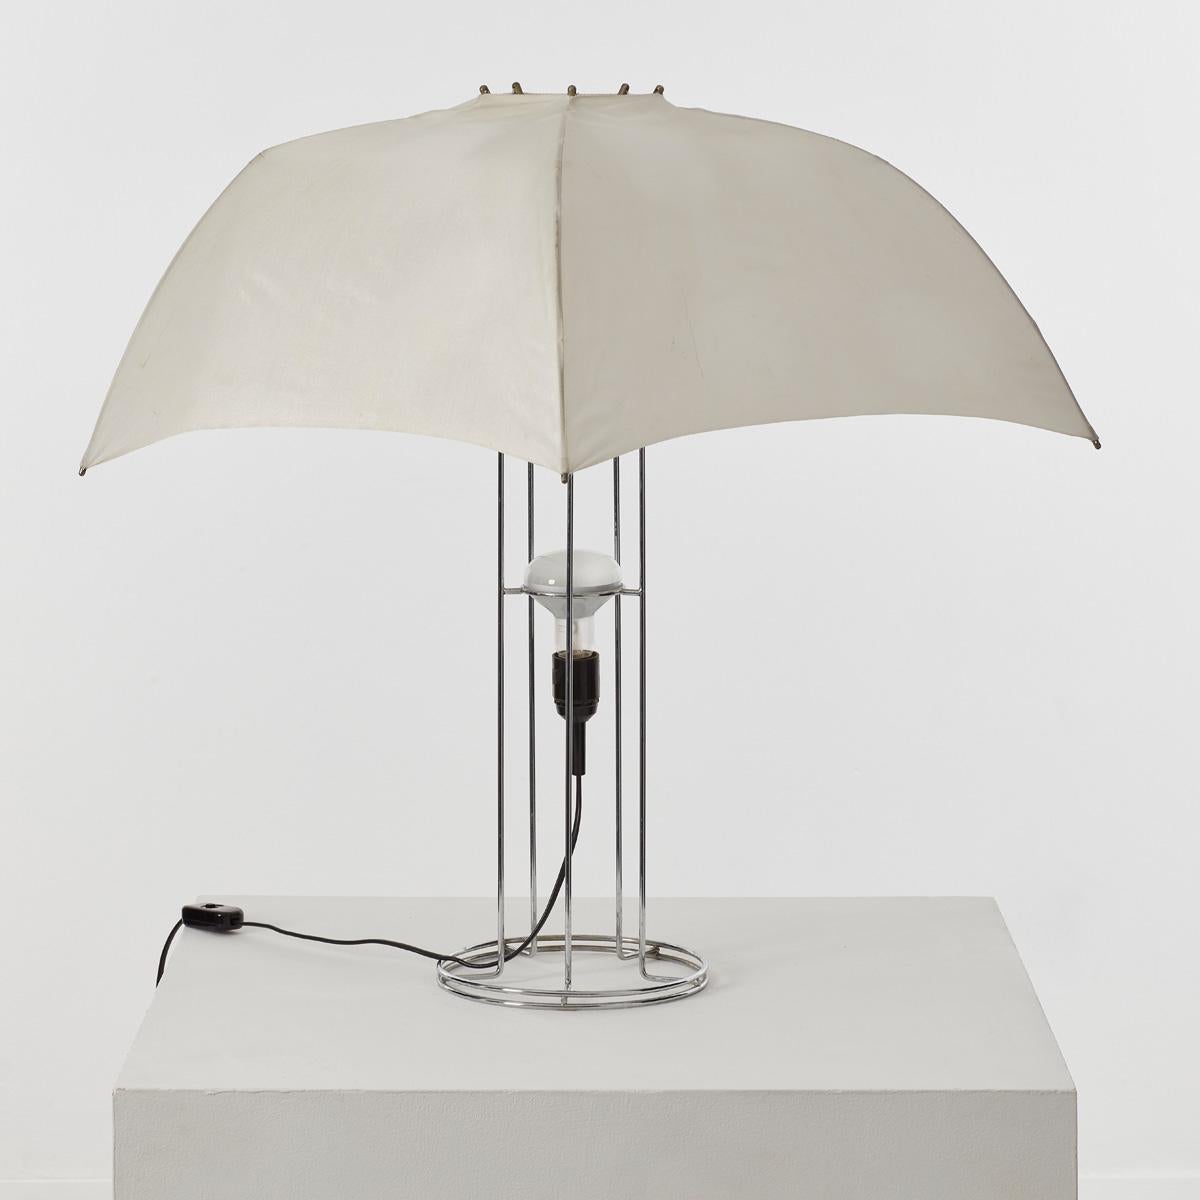 Designed by Gijs Bakker in 1973 and taking inspiration from the light defusing umbrellas used in photography studios. Bakker aimed to create a lamp with the function dispersing the light. The source of light is a simple lightbulb not masked by the